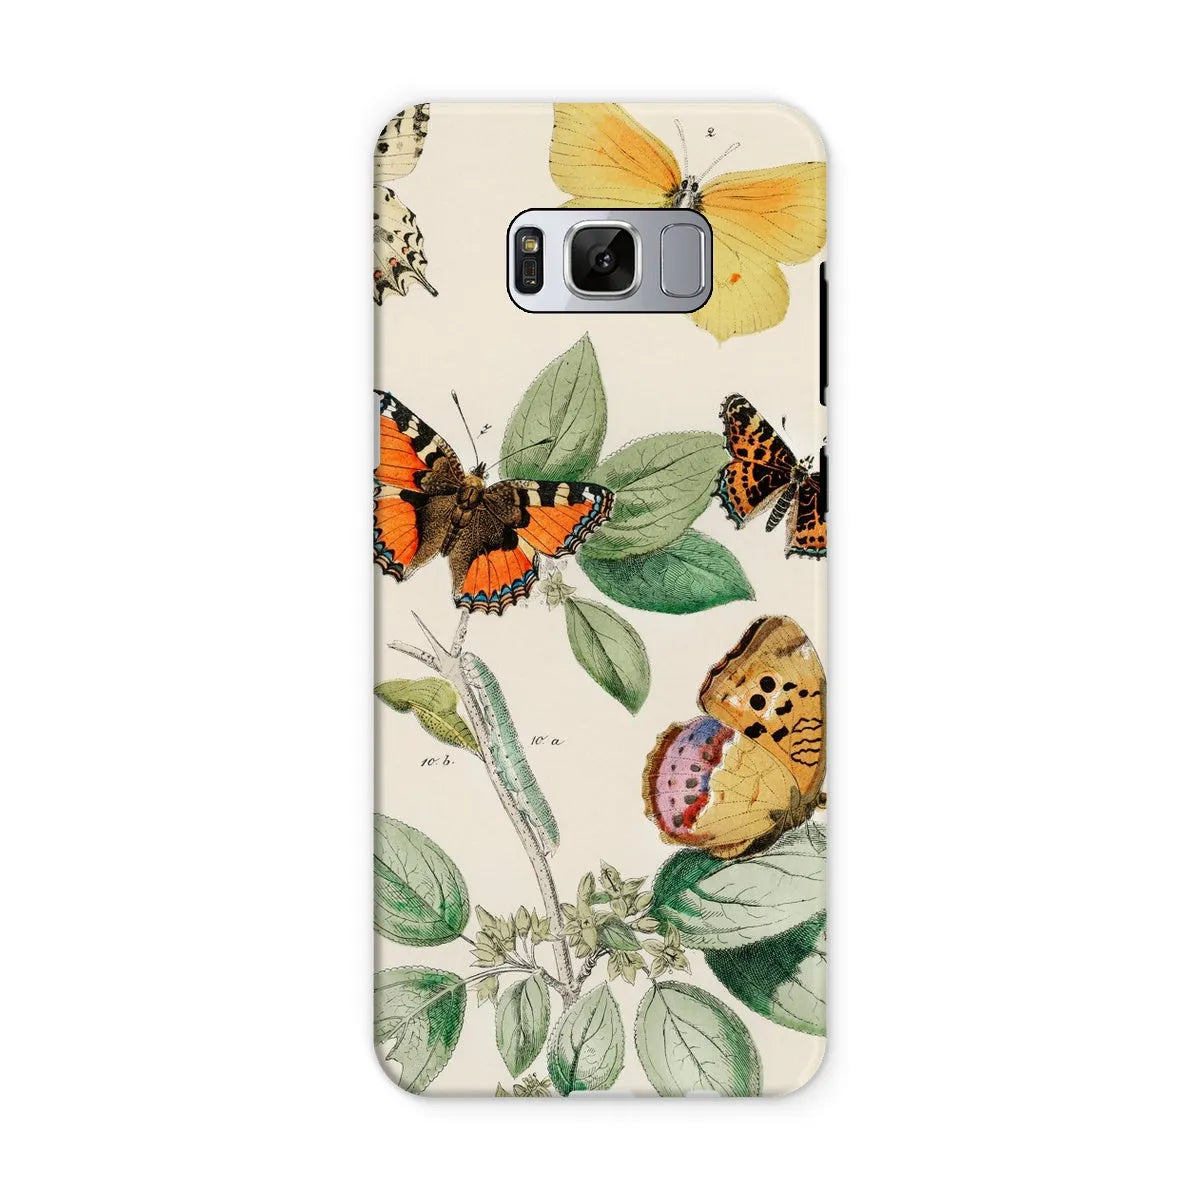 Butterfly Aesthetic Art Phone Case - William Forsell Kirby - Samsung Galaxy S8 / Matte - Mobile Phone Cases - Aesthetic